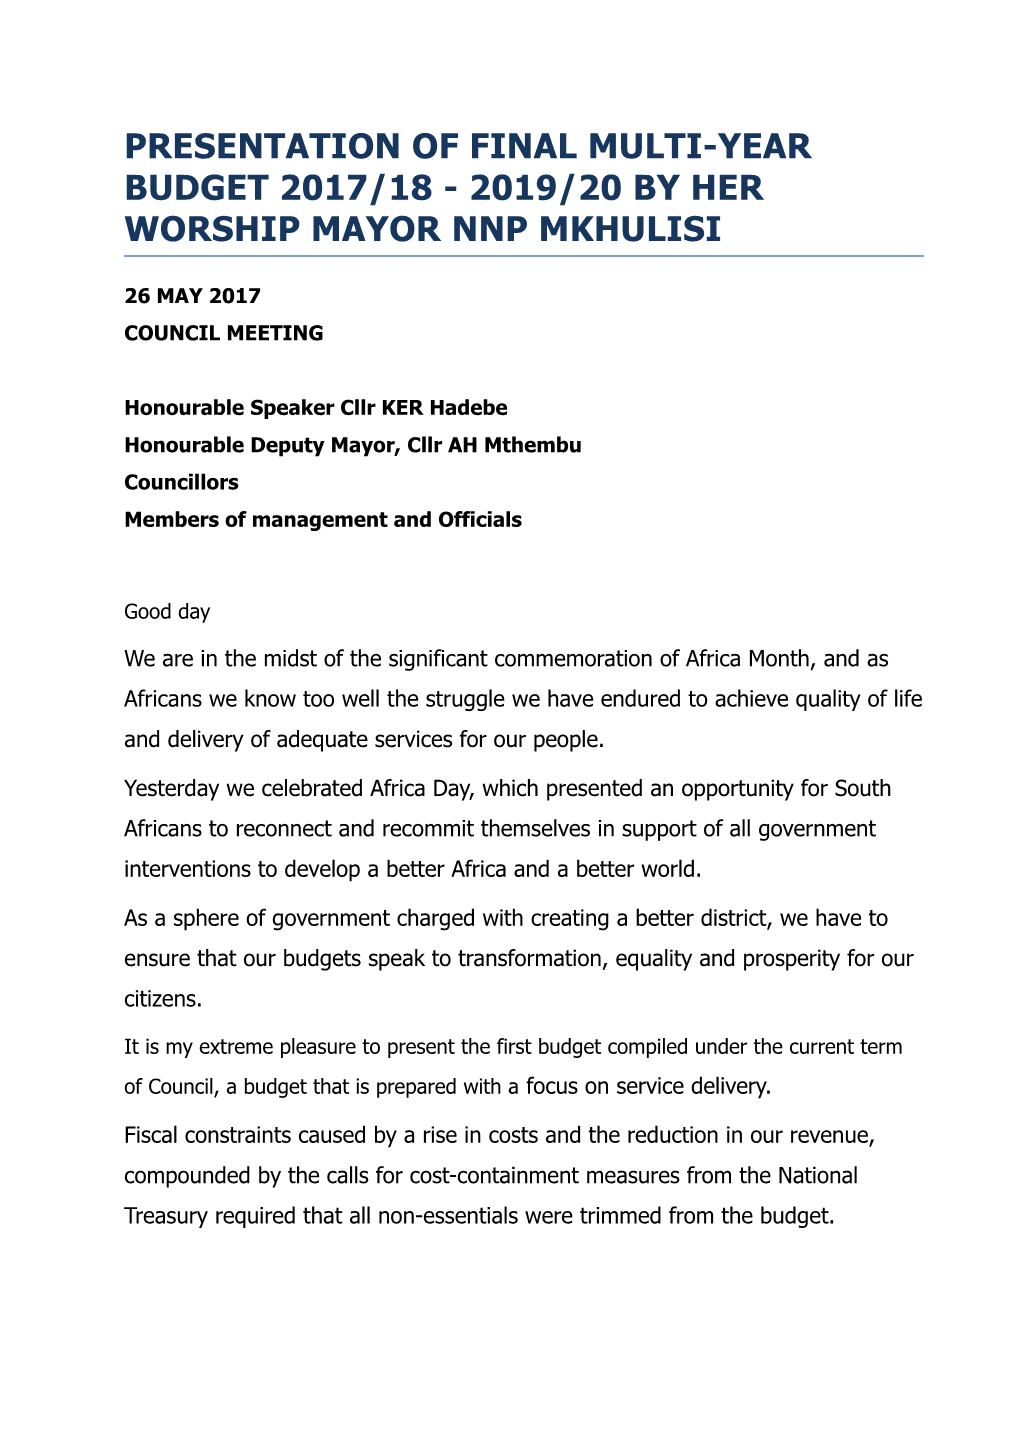 Presentation of Final Multi-Year Budget 2017/18 - 2019/20 by Her Worship Mayor Nnp Mkhulisi